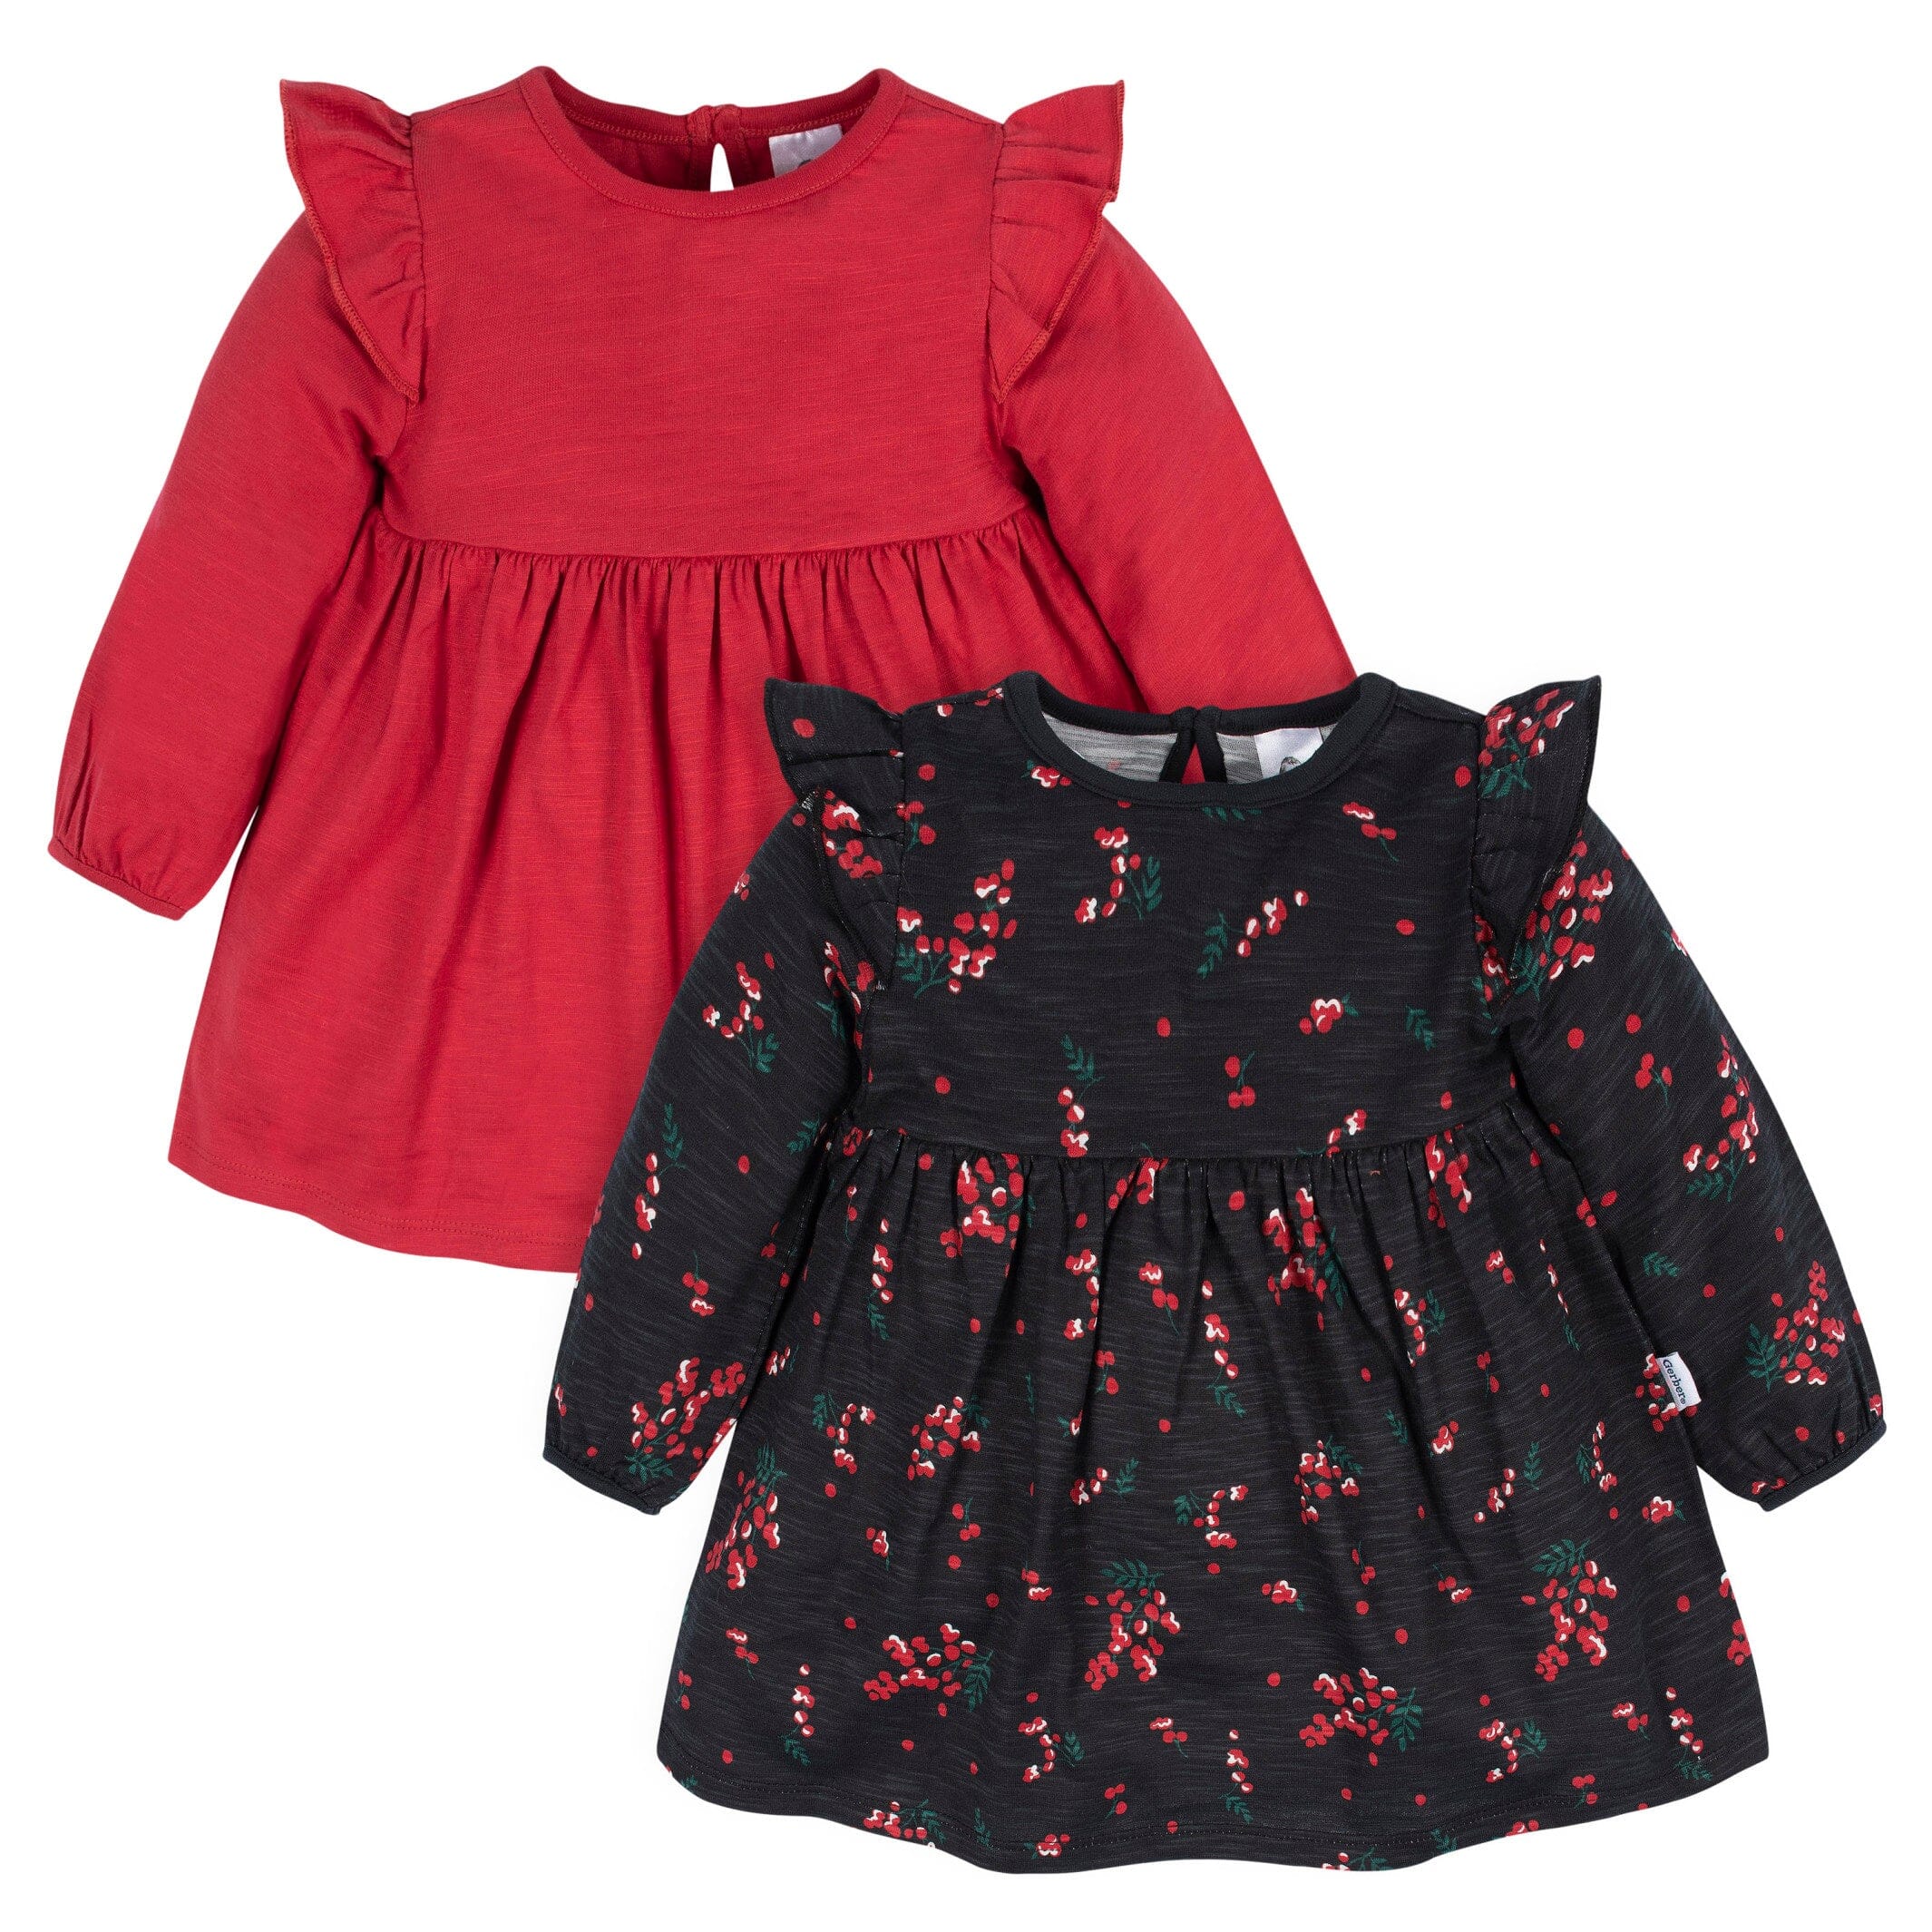 Baby Girls' Dress Cotton Clothes Top Pant Set 2-3 Years Red Black